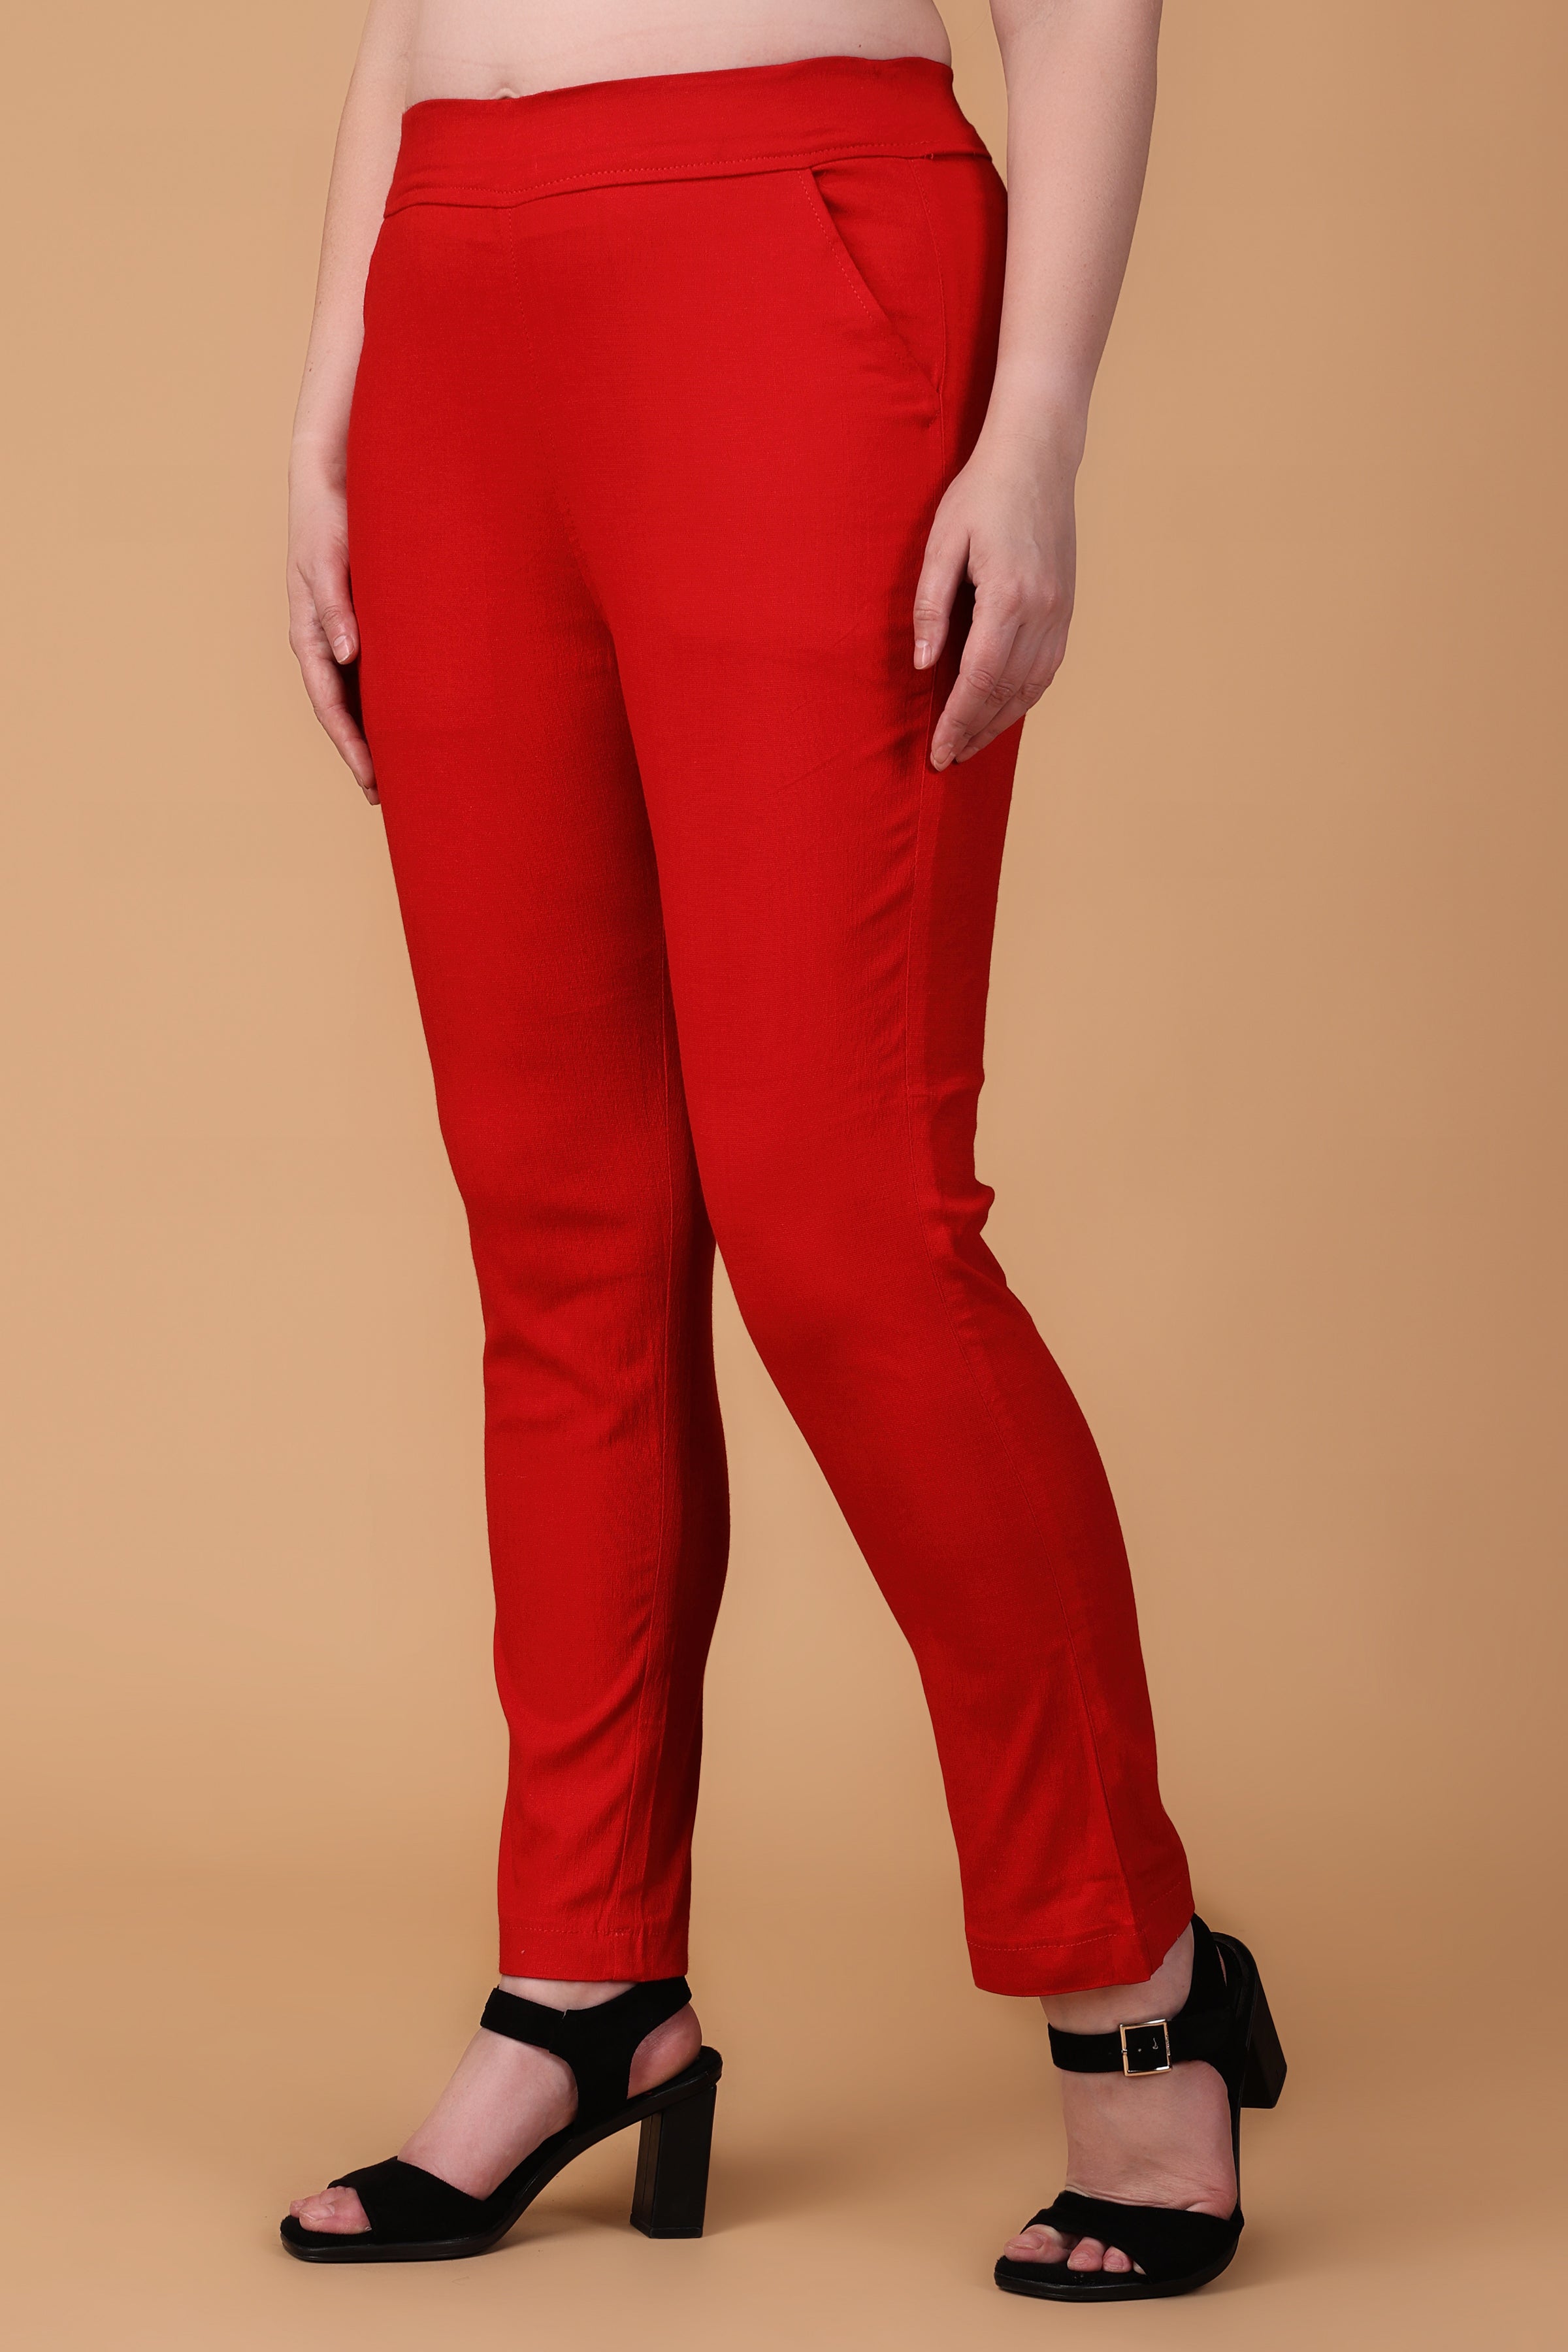 Buy Lycra Pants Womens & Stretchable Pants For Ladies - Apella